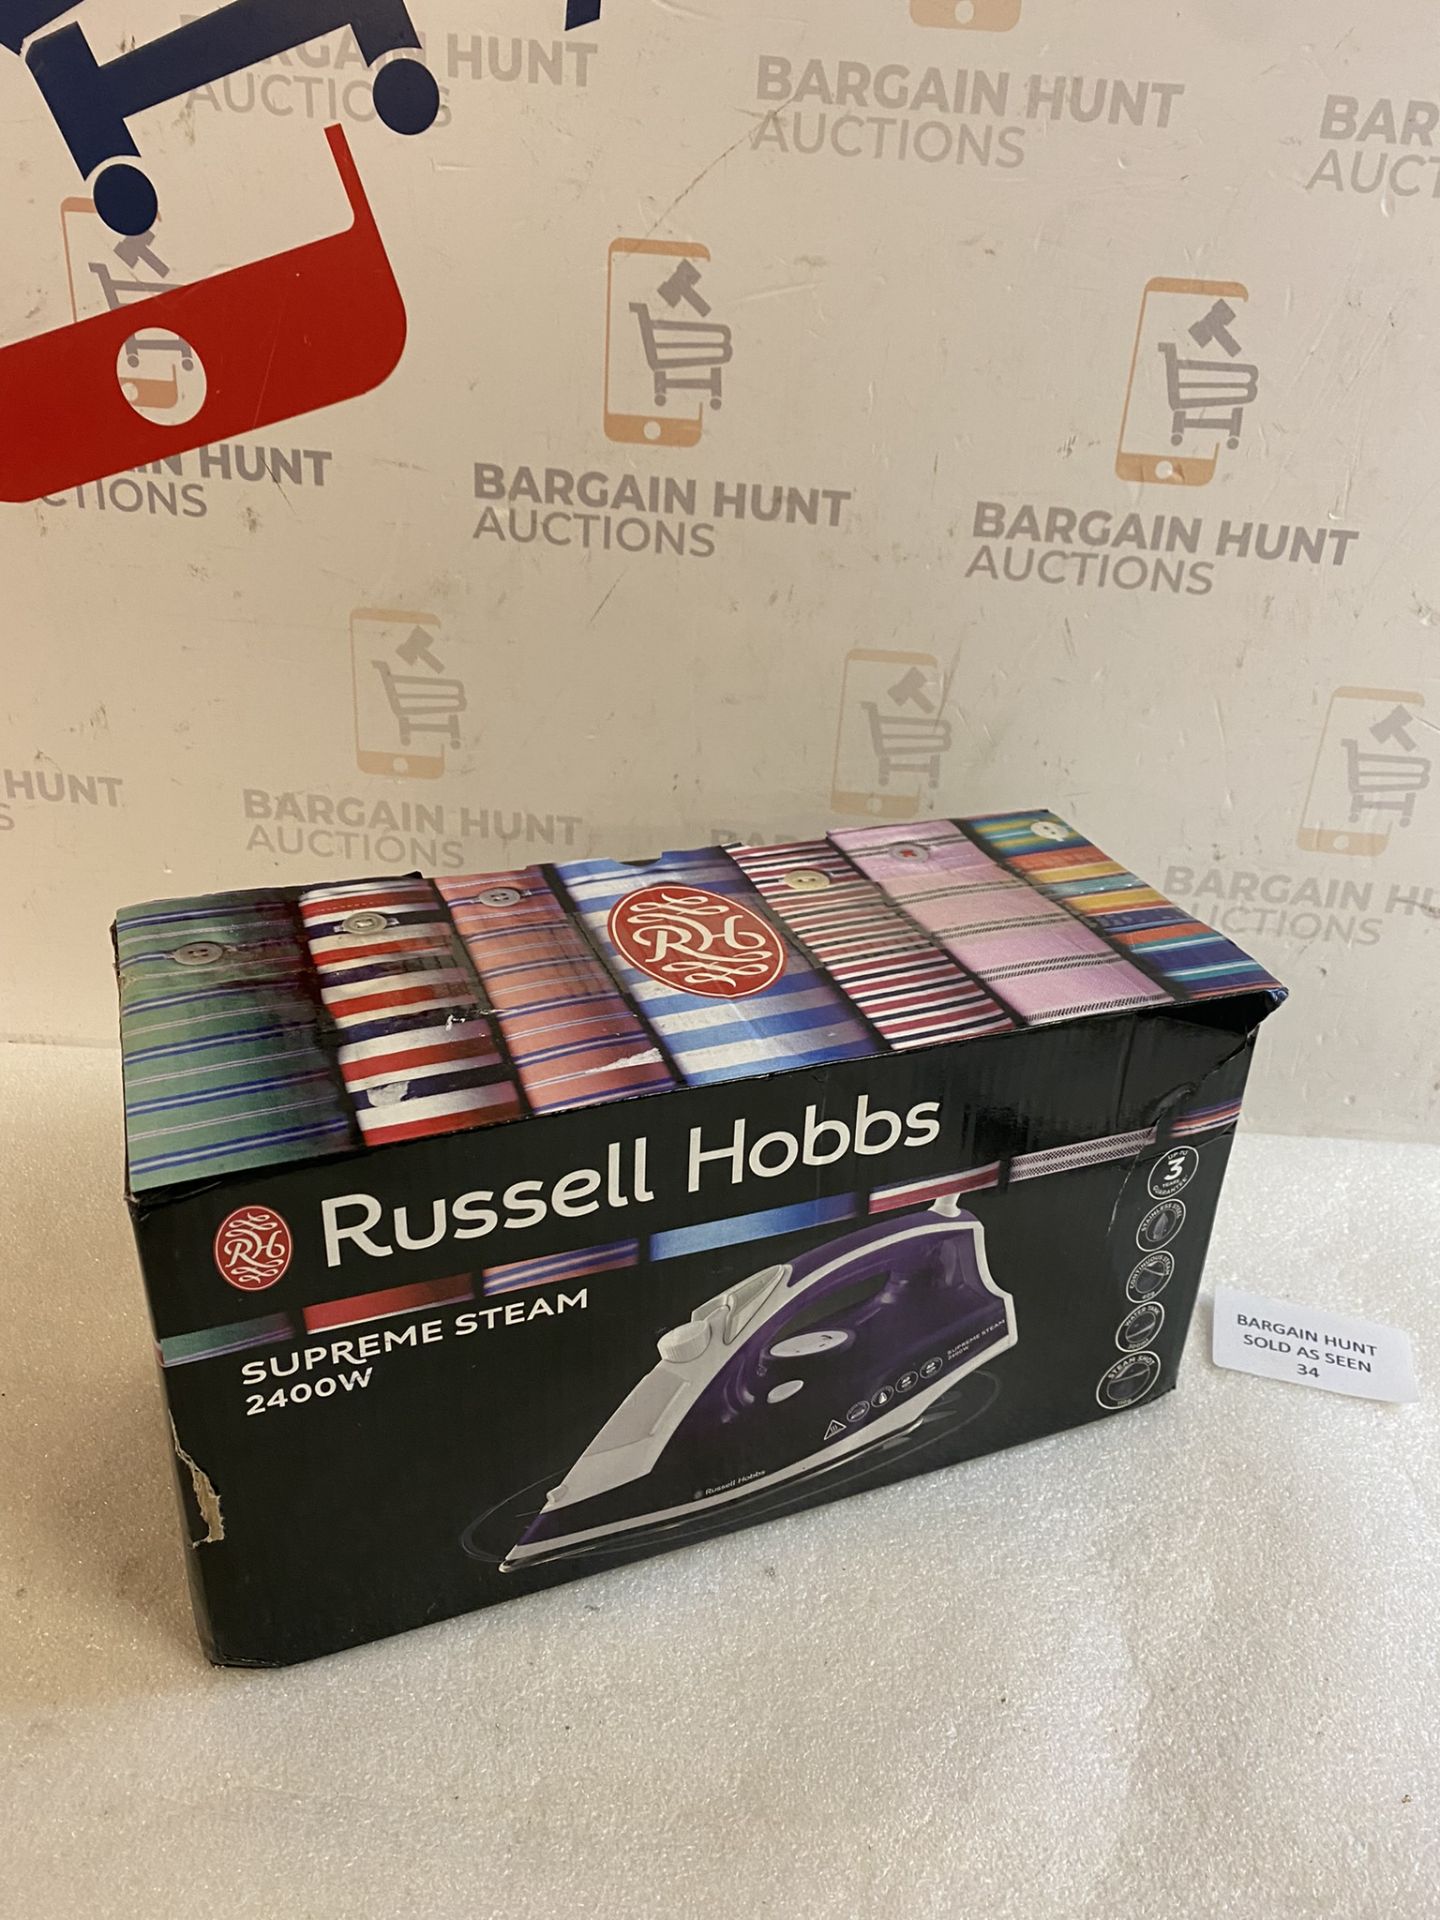 Russell Hobbs Supreme Steam Traditional Iron 23060 RRP £24.99